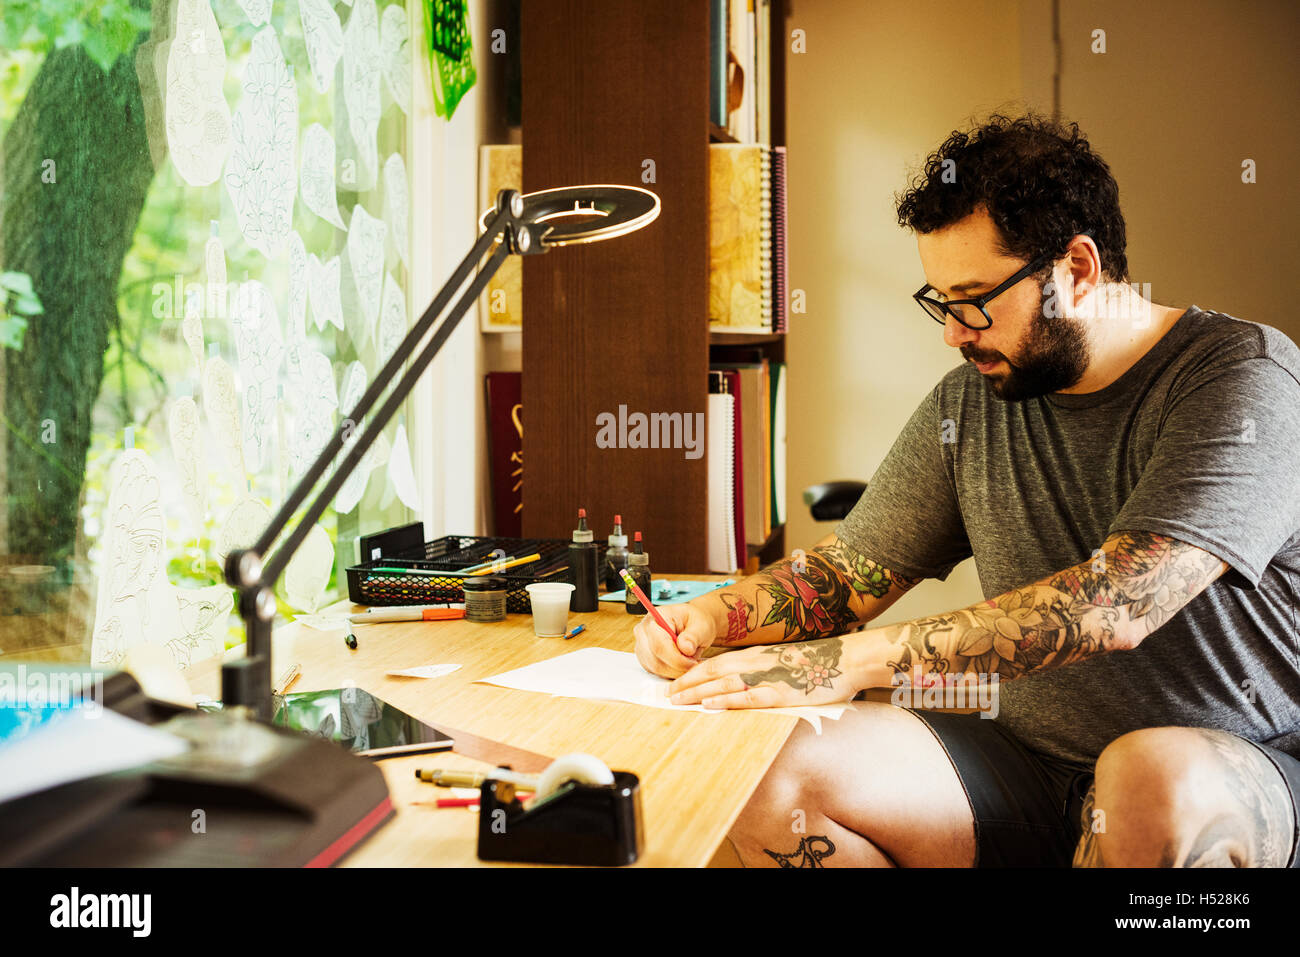 Bearded man with tattoos wearing glasses, sitting at a desk, drawing. Stock Photo